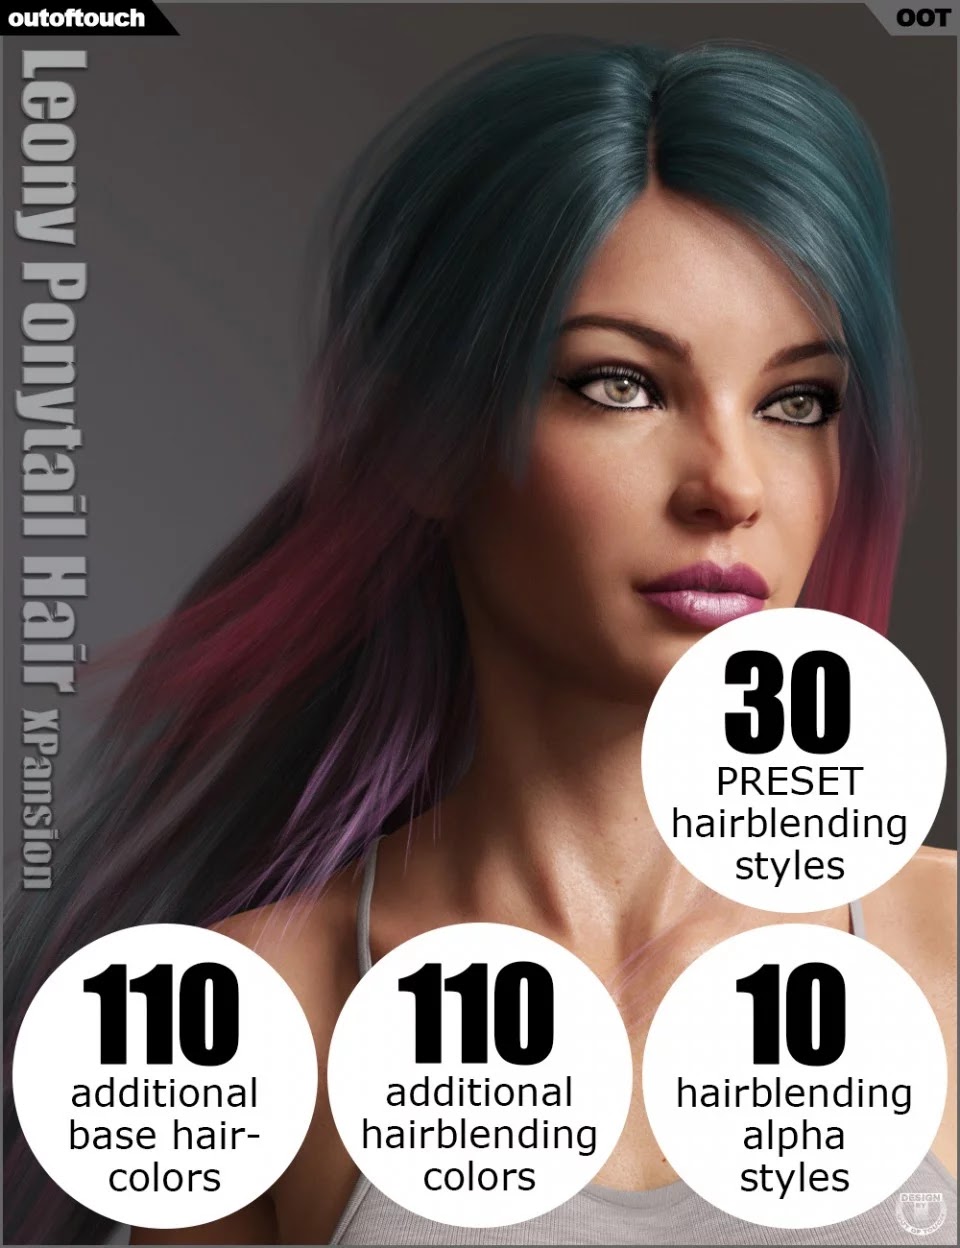 OOT Hairblending 2.0 Texture XPansion for Leony Wet & Dry Ponytail Hair_DAZ3D下载站